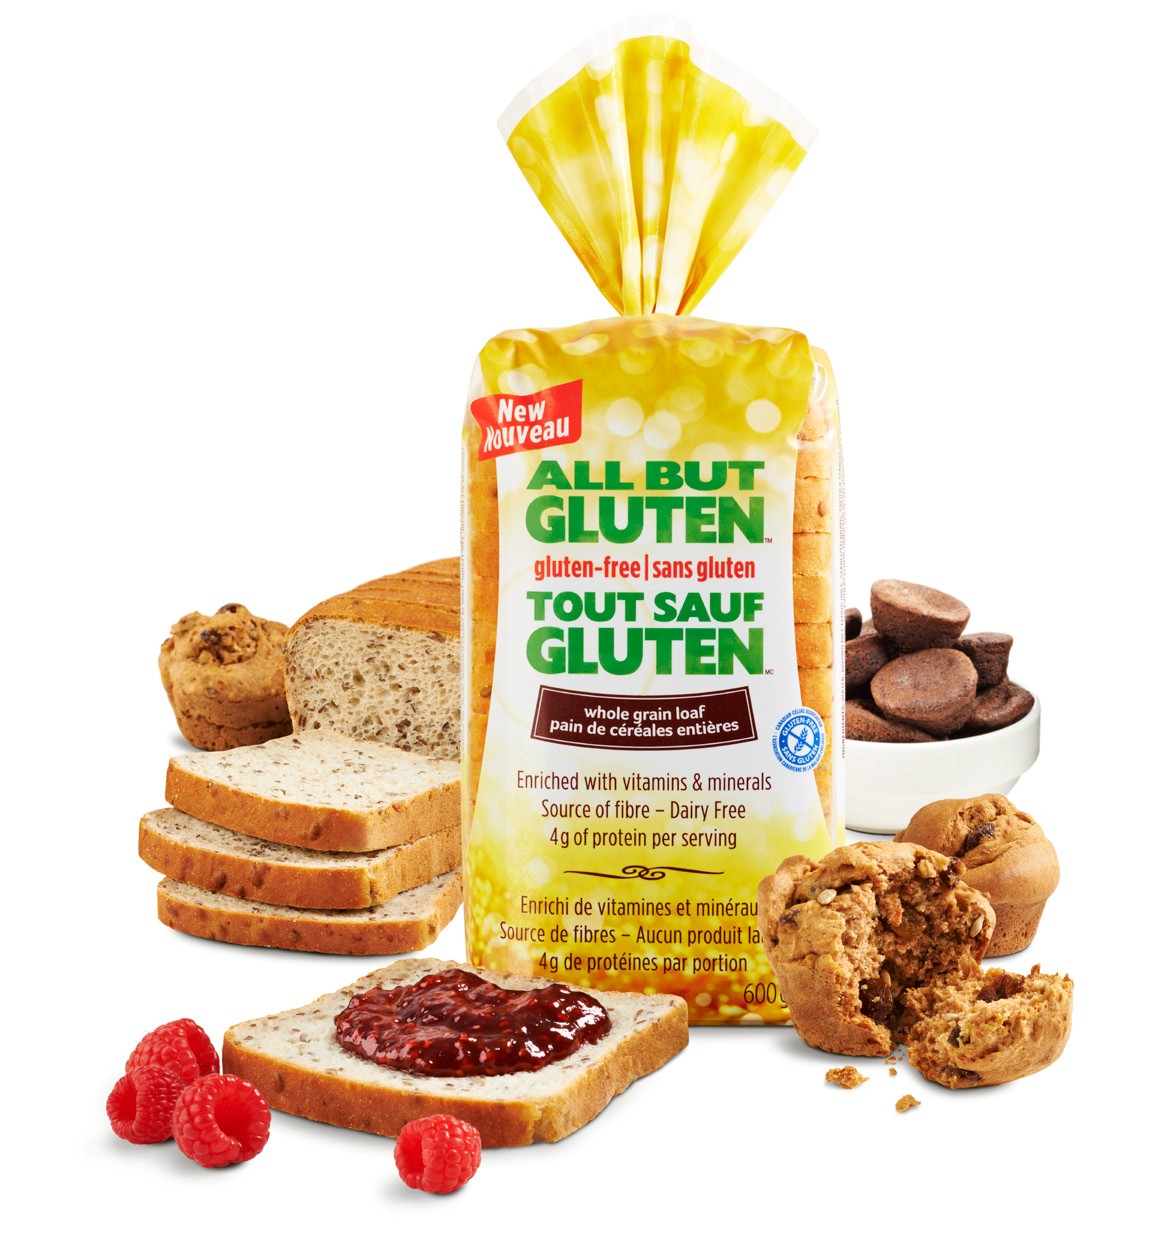 New ALL BUT GLUTEN™ Baked Goods Launches During Celiac Awareness Month